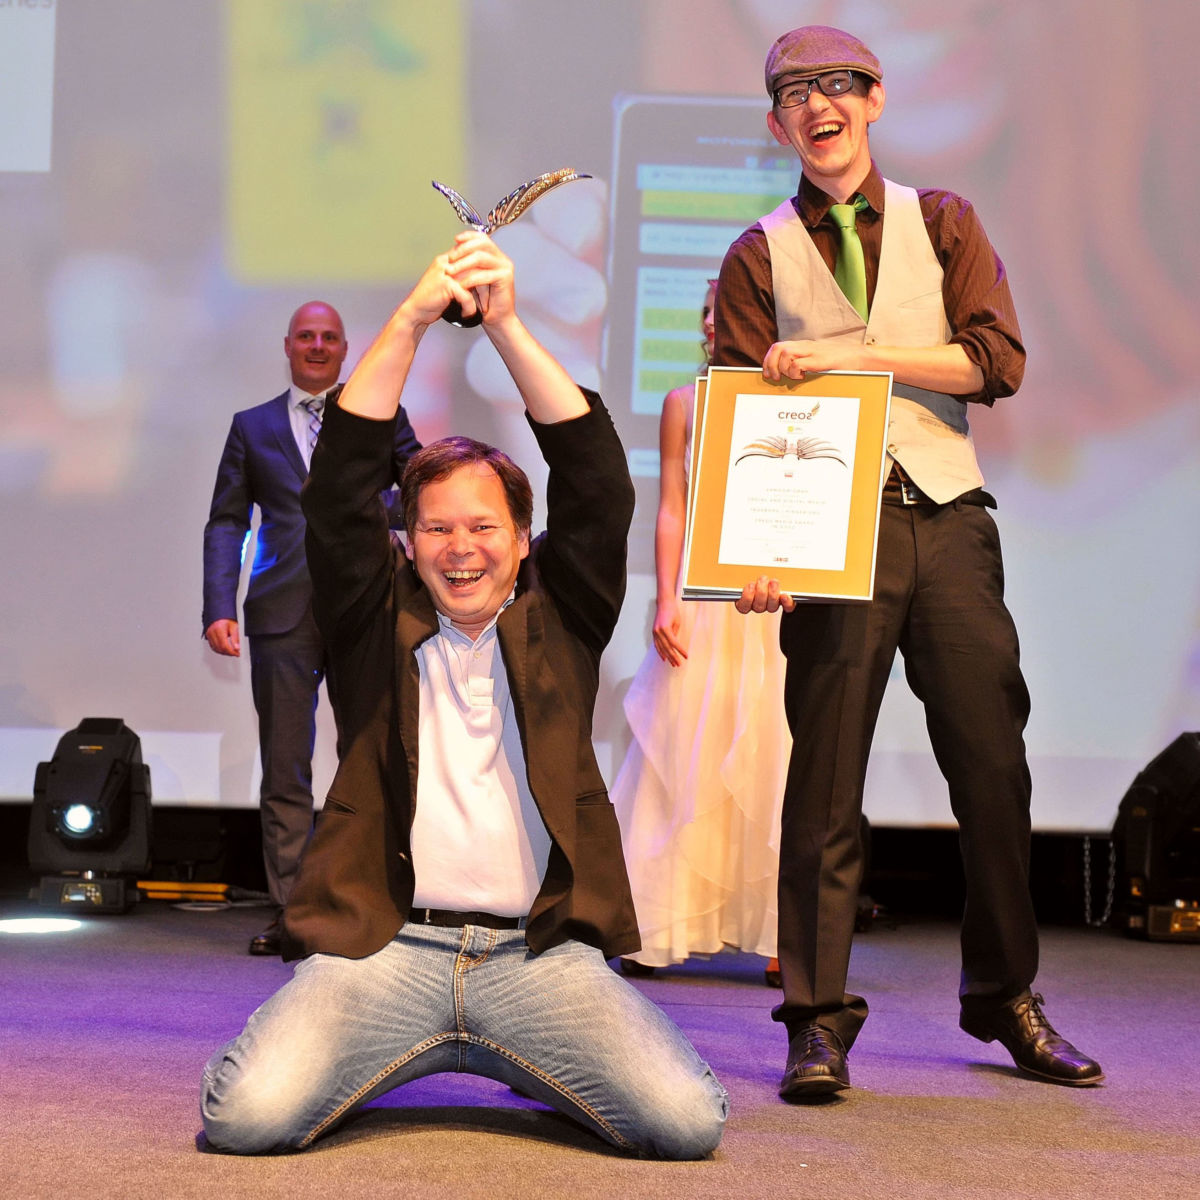 Georg and Bruno pose as winners of a CREOS award in gold